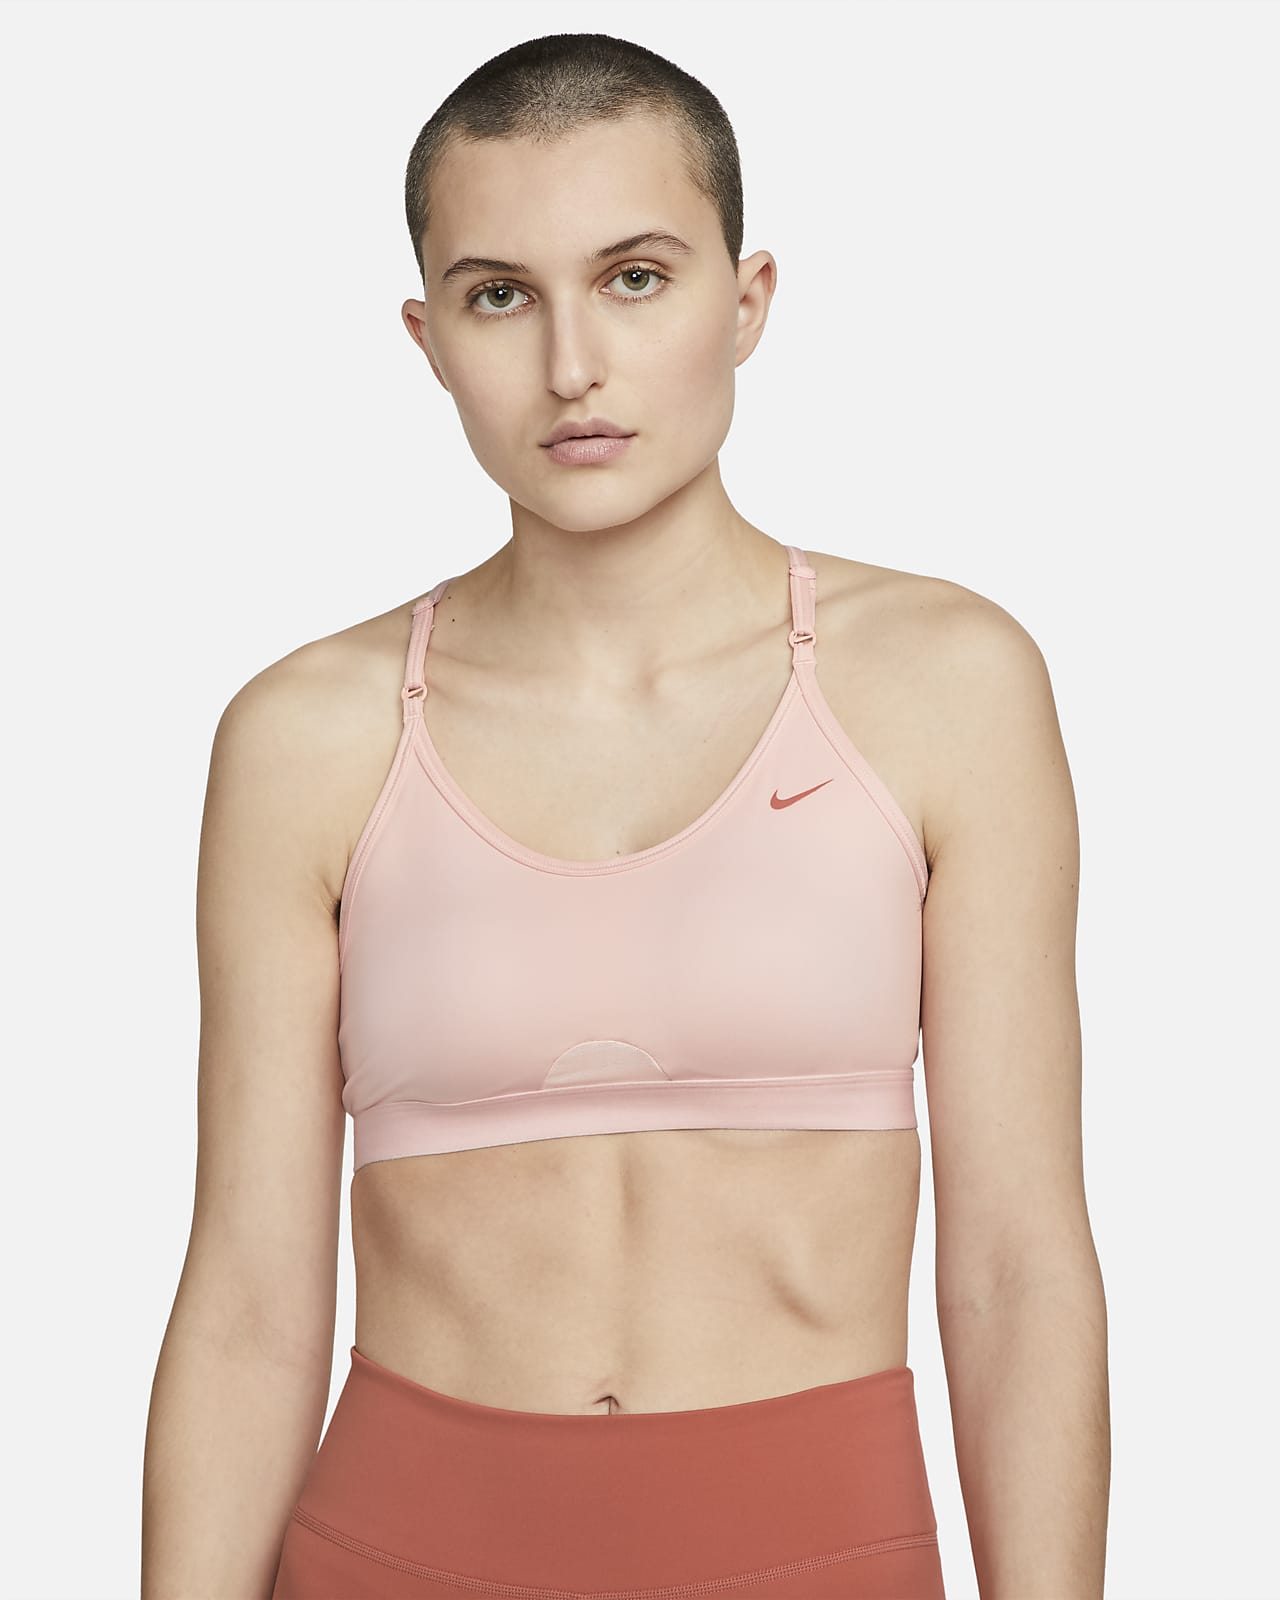 Nike Indy Strappy Women's Light-Support Padded Sports Bra